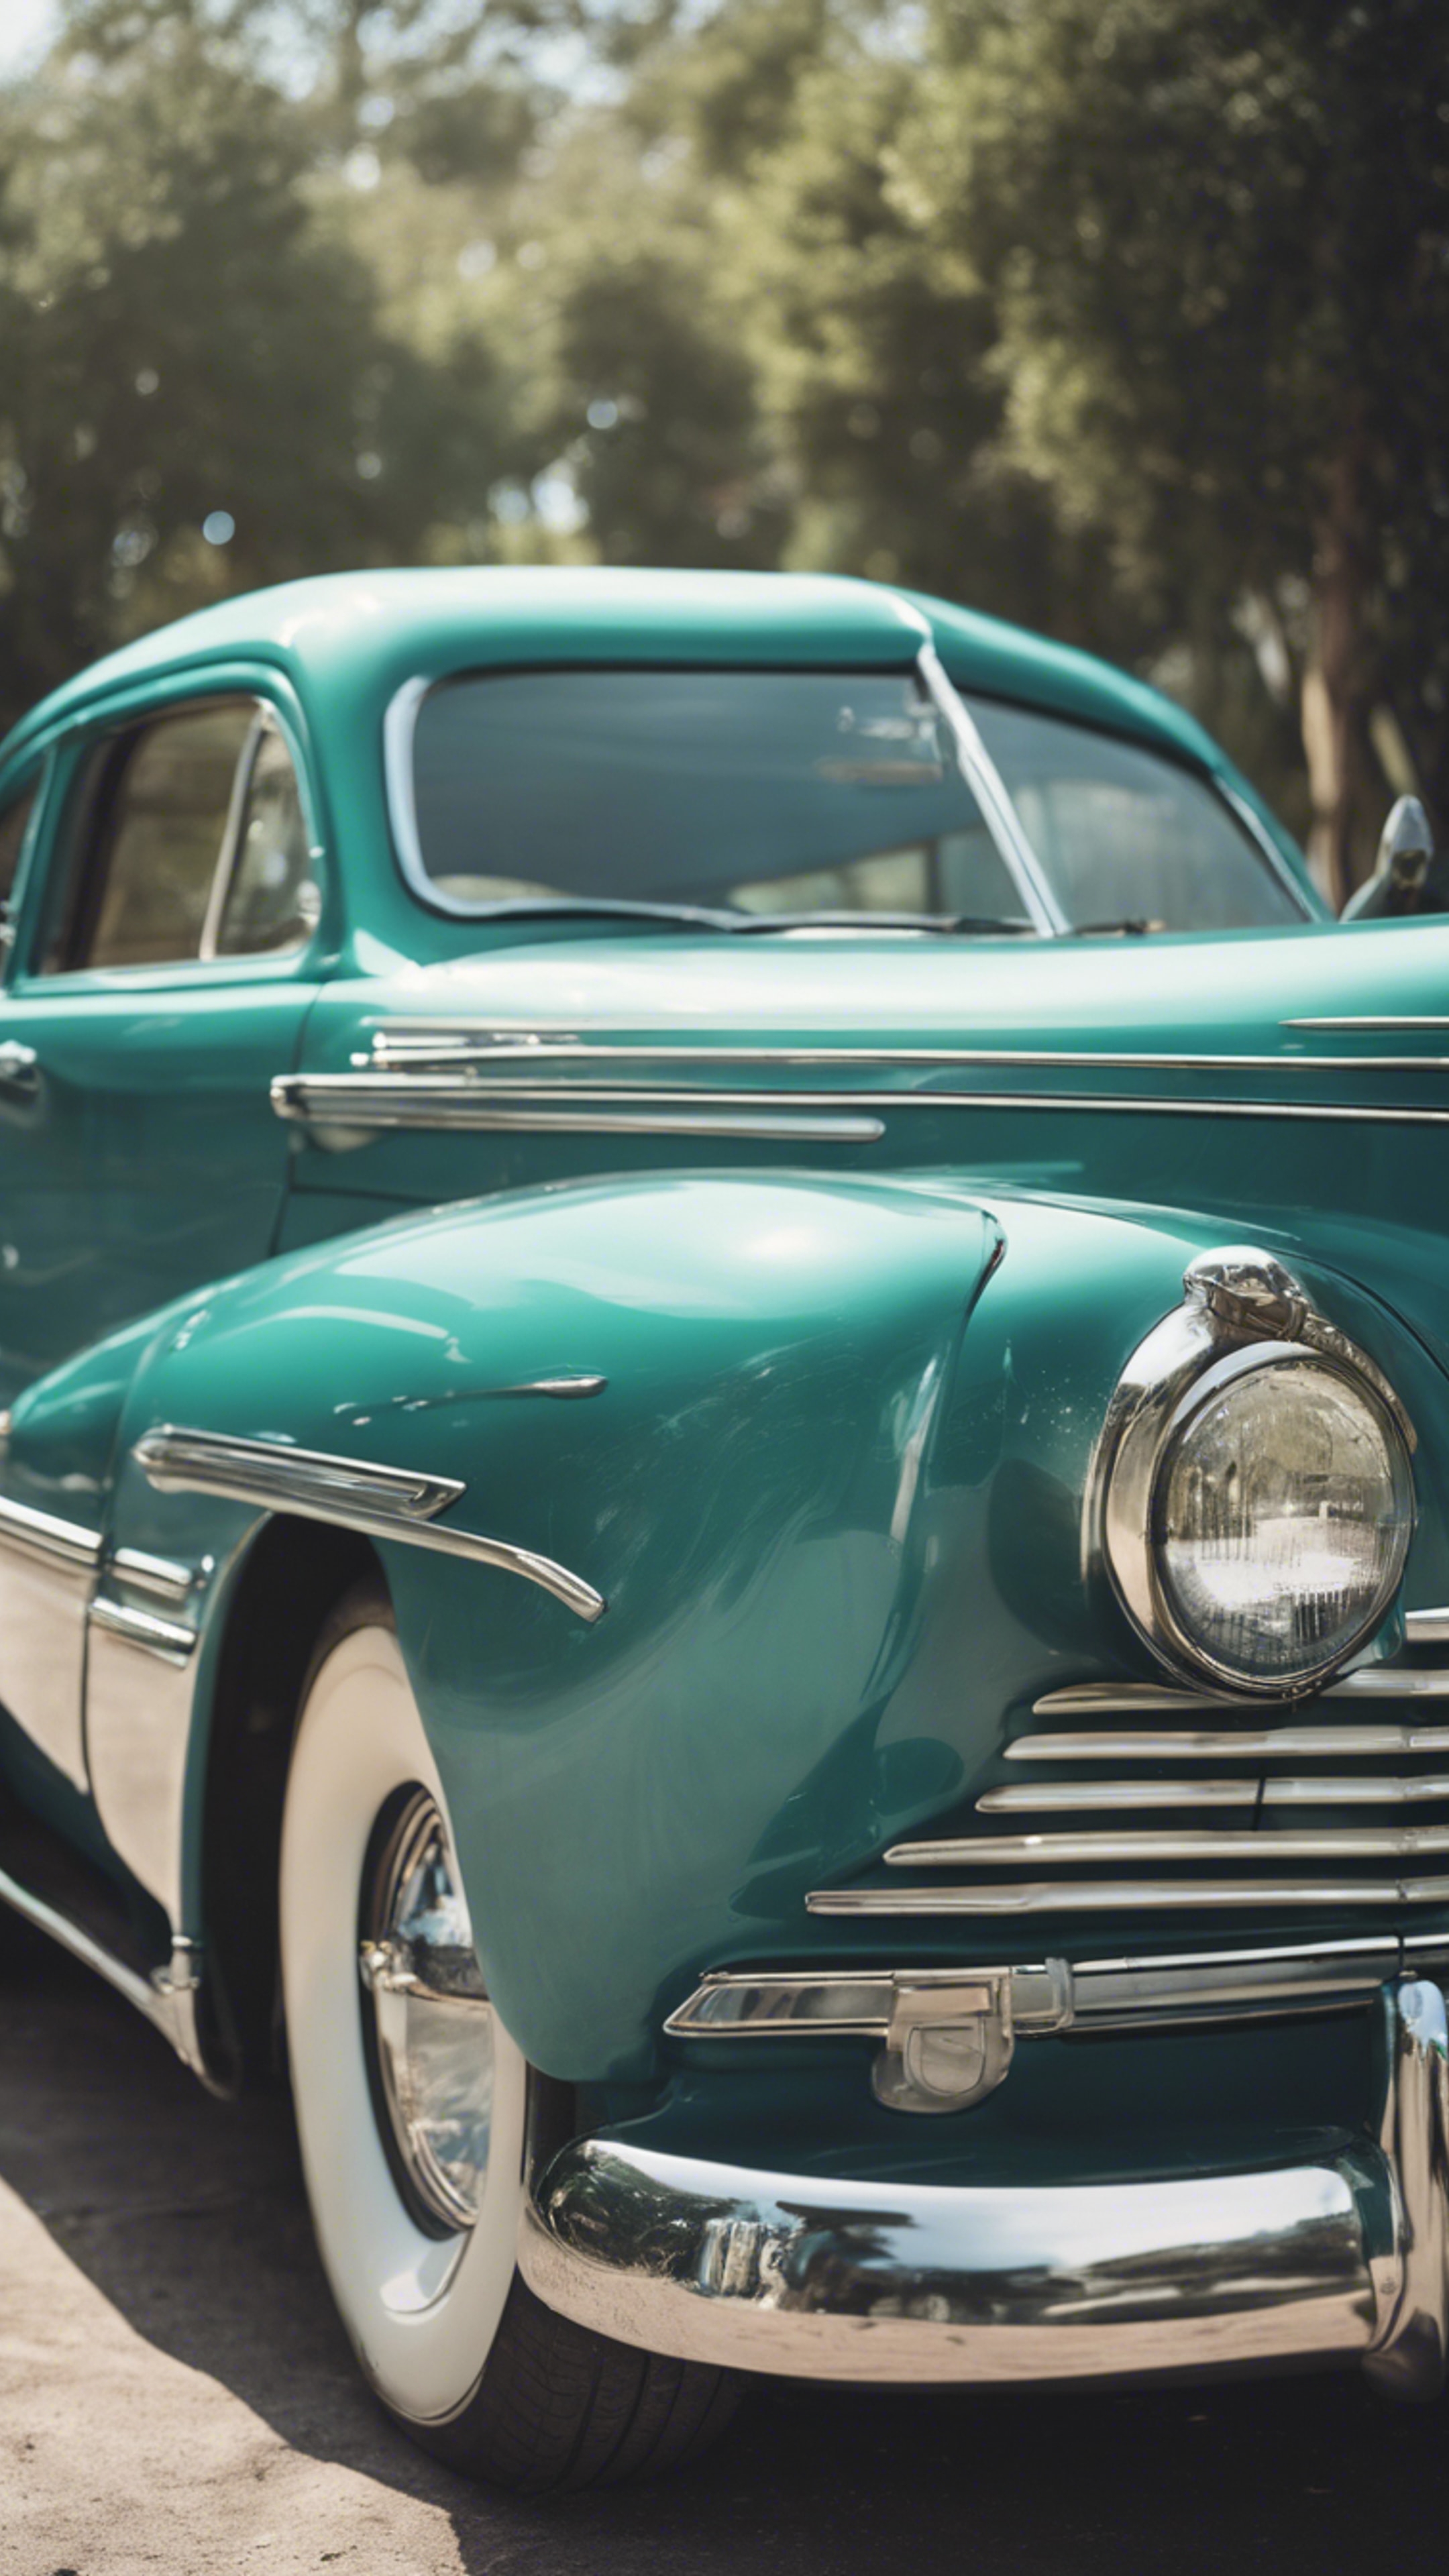 A vintage automobile polished in a cool teal color. 벽지[a65c55f132fb459cb8fd]